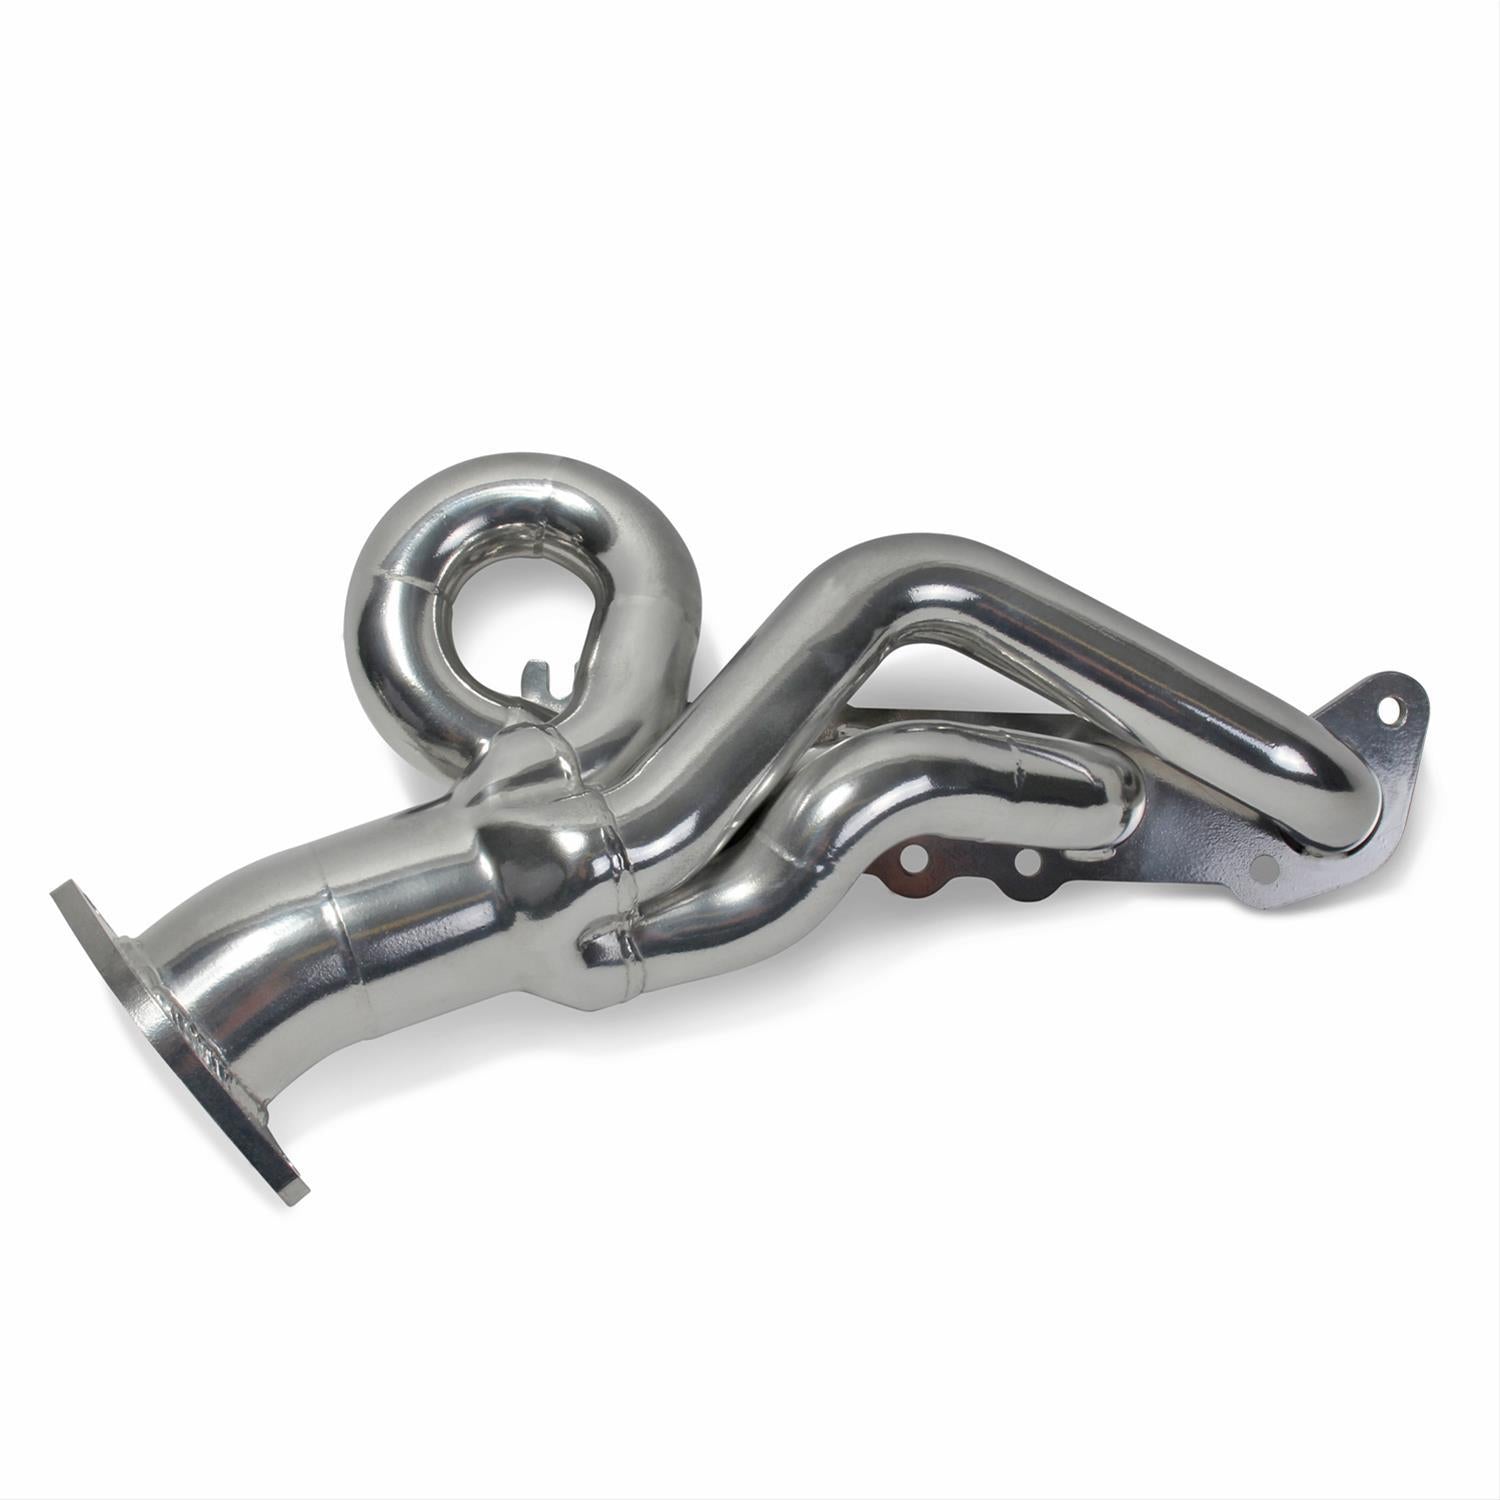 BBK 2015-17 Ford Mustang GT 5.0L 1-3/4" Shorty Tuned Length Performance Exhaust Headers - Polished Ceramic 18480